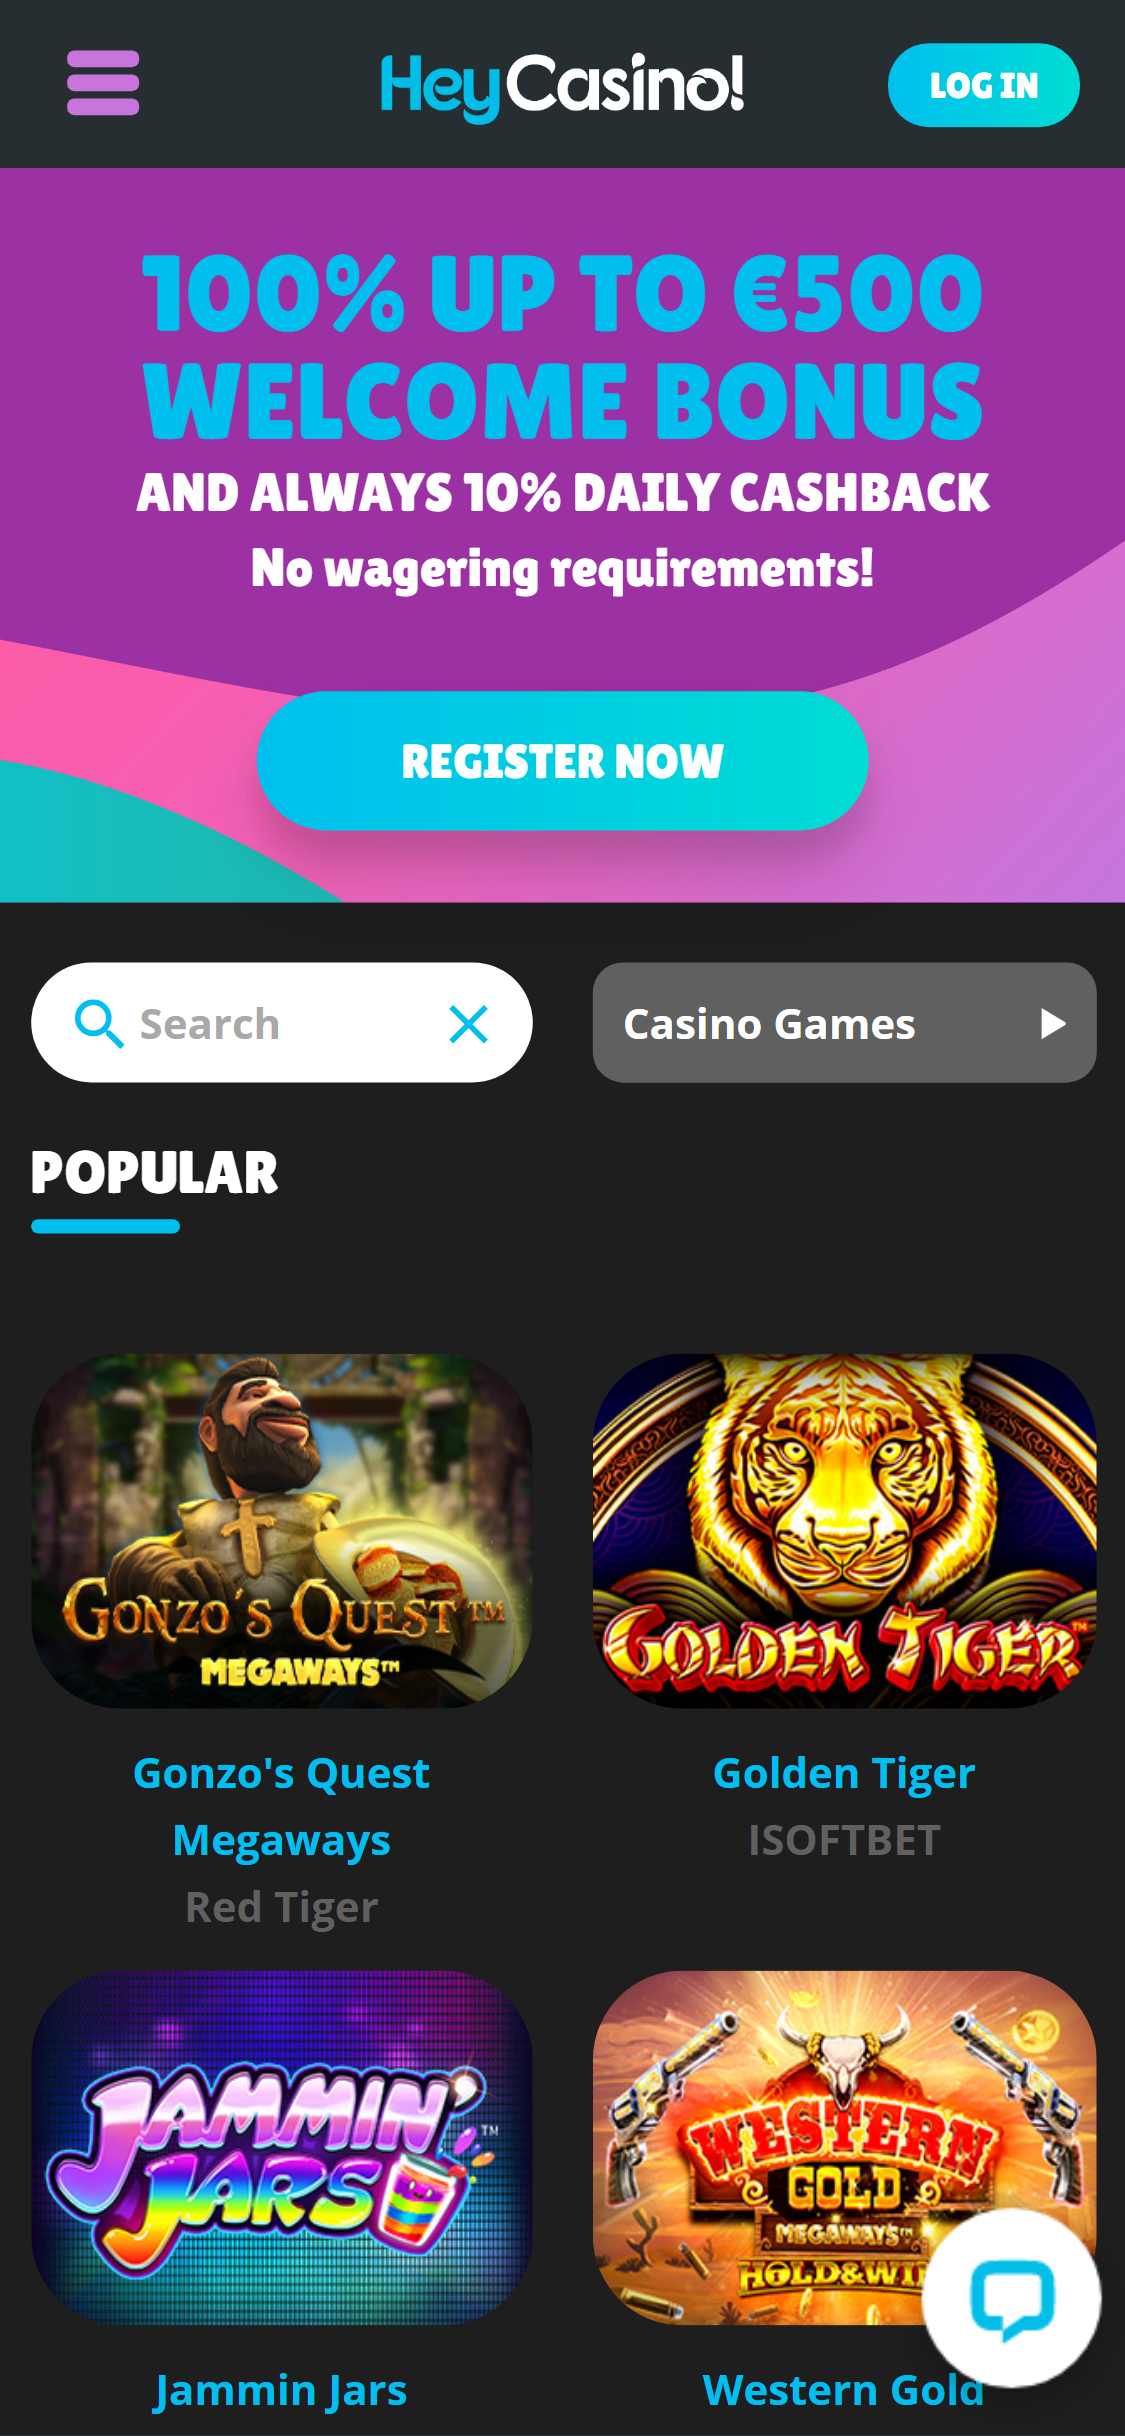 HeyCasino! Mobile Review